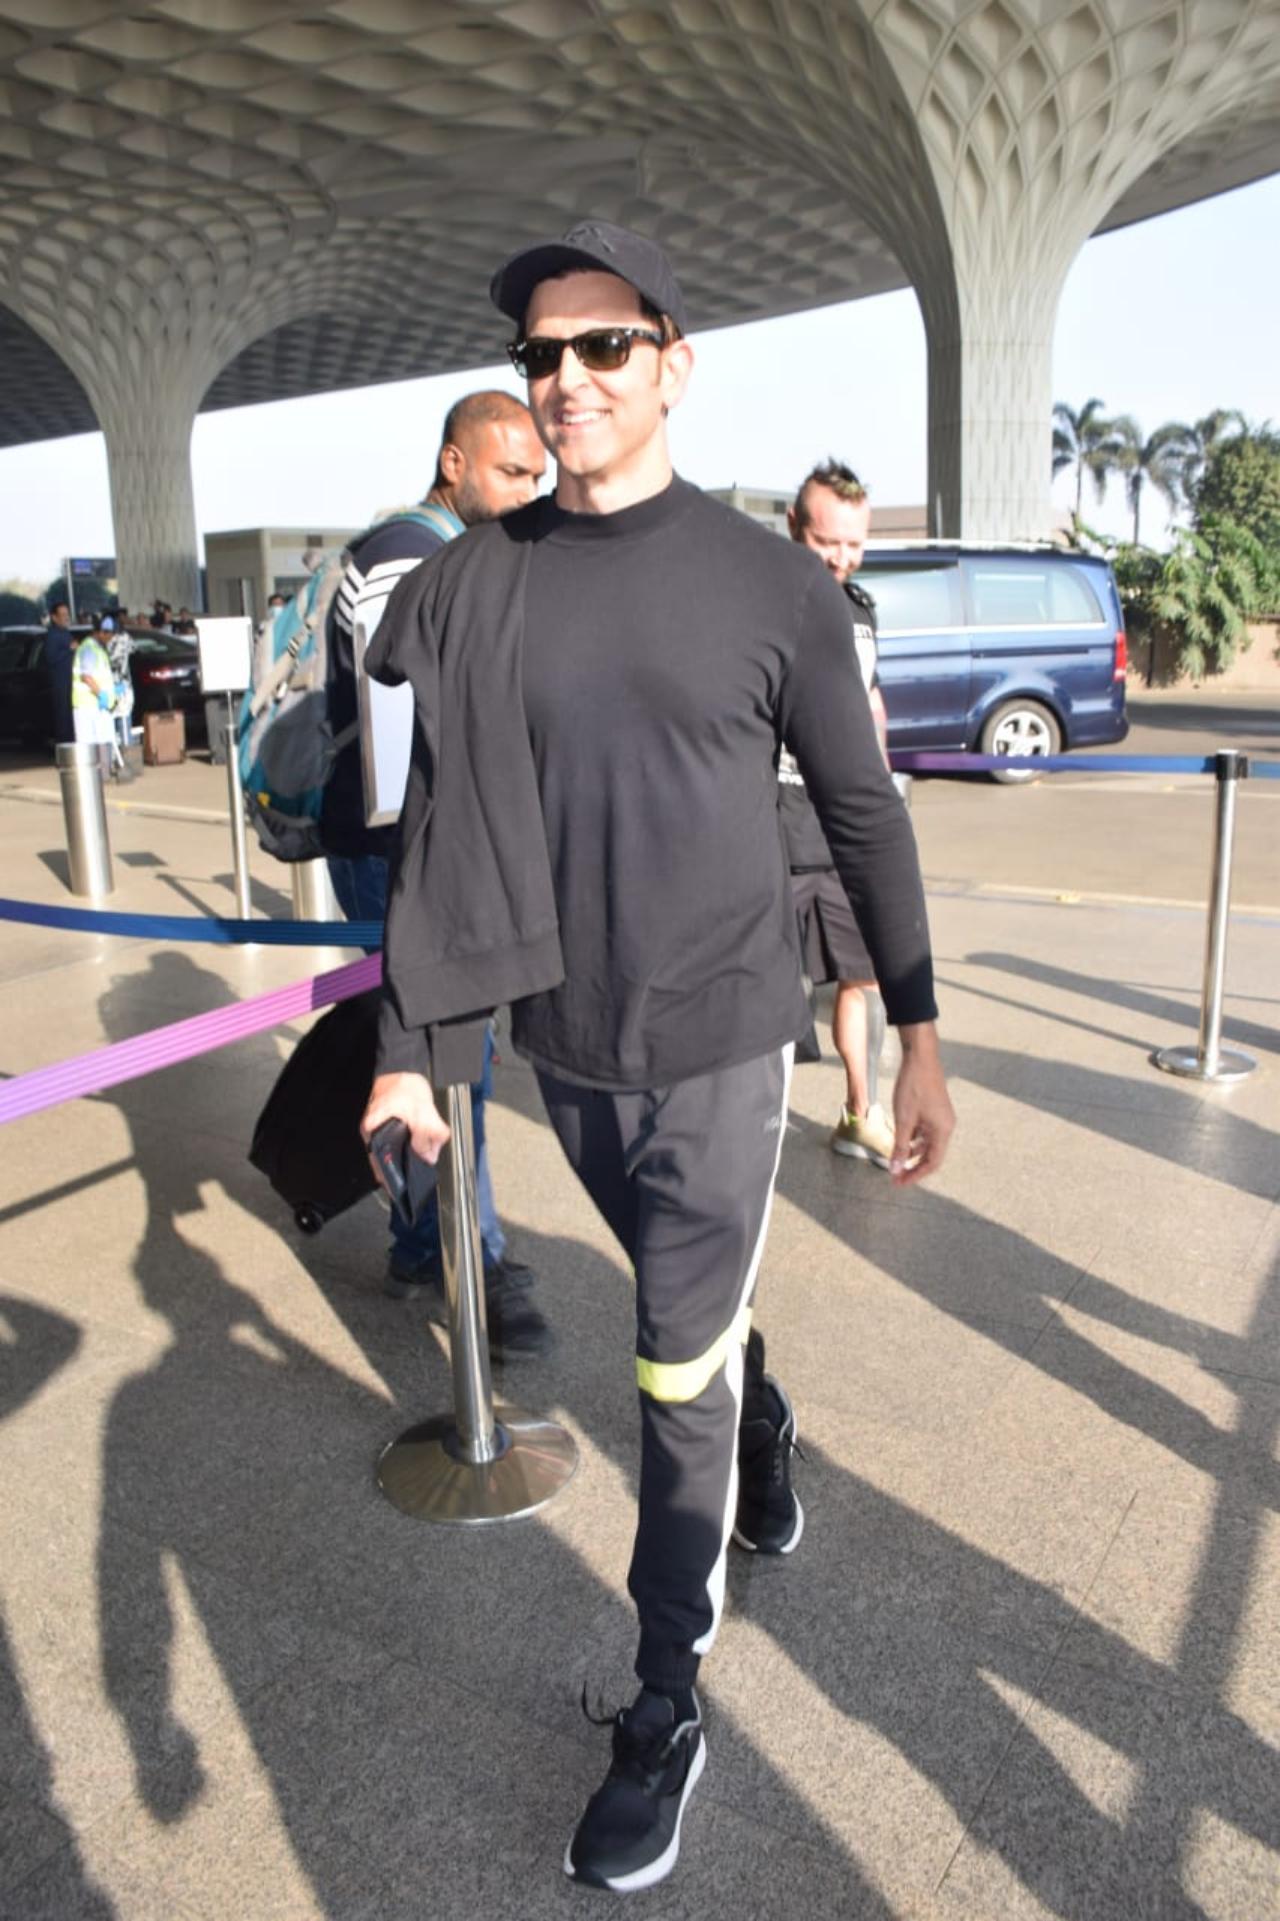 Hrithik Roshan was spotted at Mumbai aiport on Monday morning as he took off for the next schedule of his upcoming film 'Fighter'. He was spotted in an all-black  casual outfit for his flight